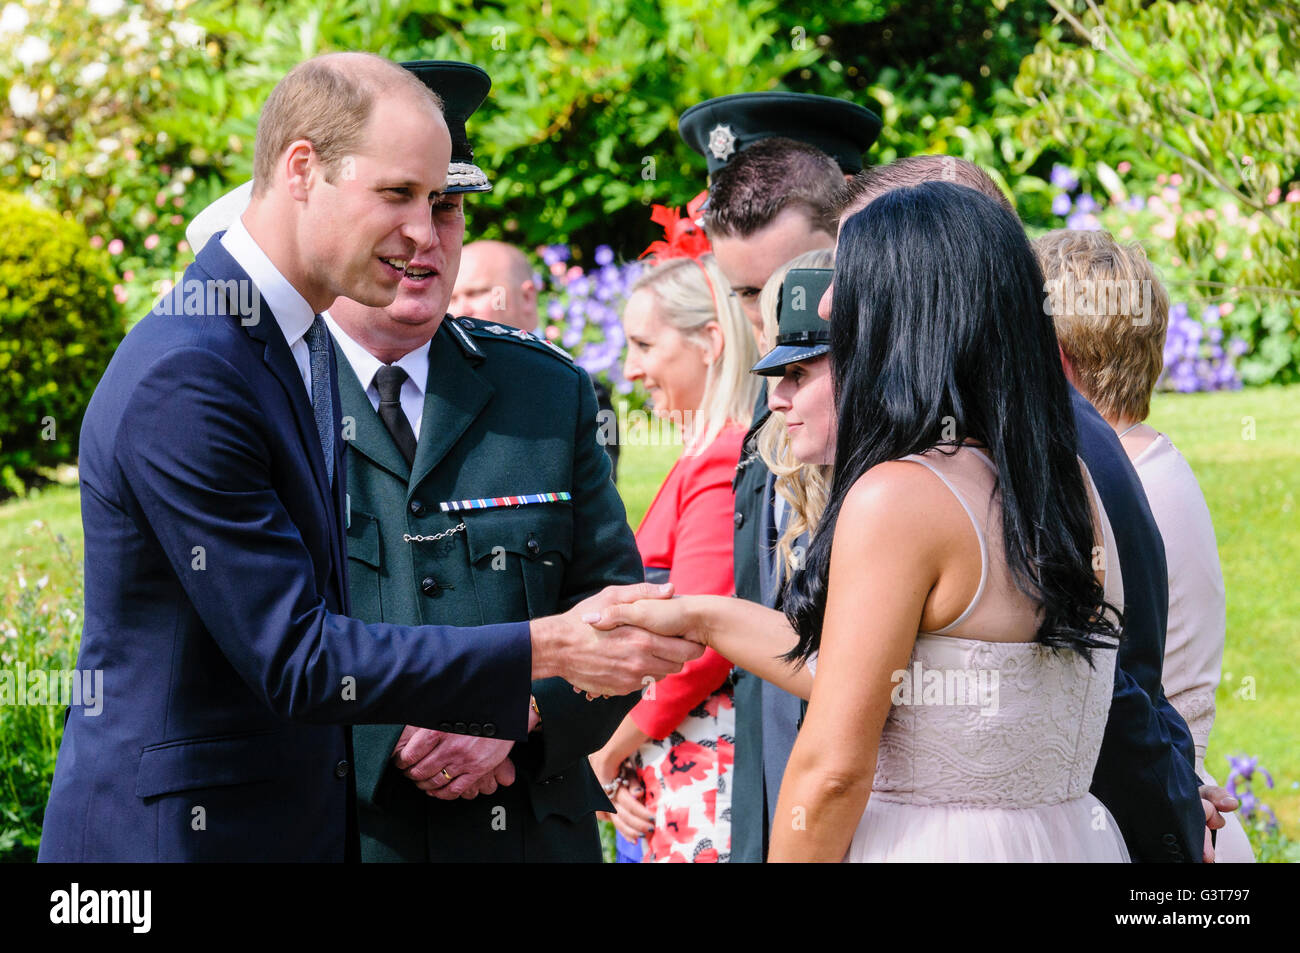 Hillsborough, Northern Ireland, UK. 14th June, 2016. The Duke of Cambridge meets serving officers from the PSNI as he attends the Northern Ireland Secretary of State's annual garden party. Credit:  Stephen Barnes/Alamy Live News Stock Photo